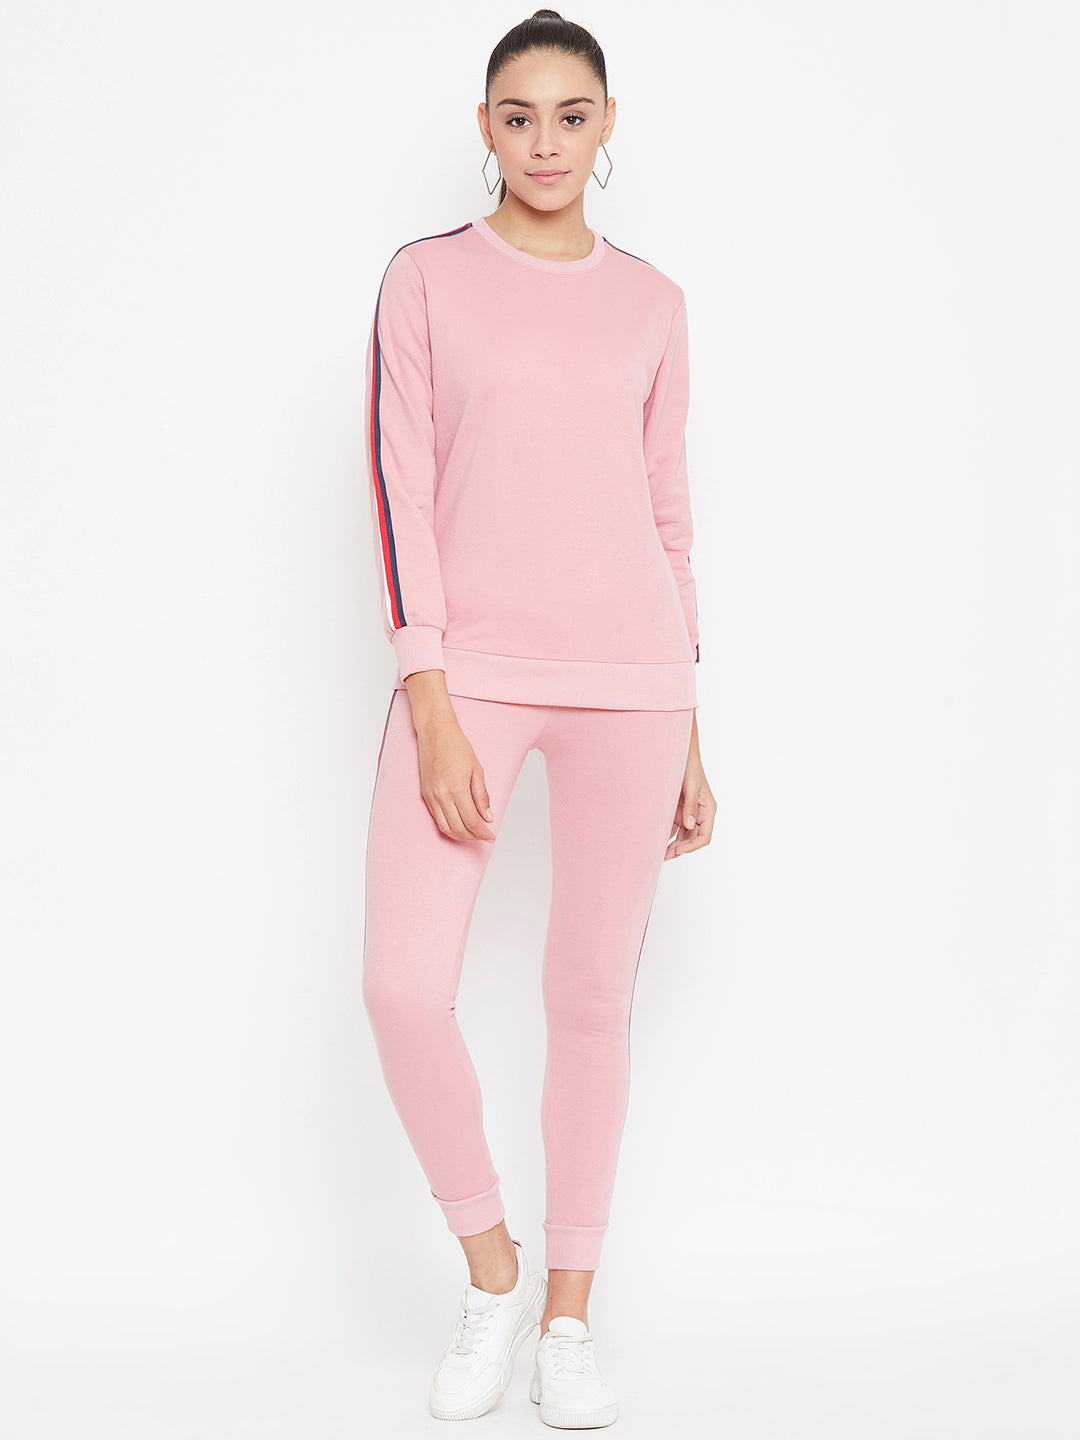 Austin Wood Women'sPink Full Sleeves Solid Round Neck Tracksuit